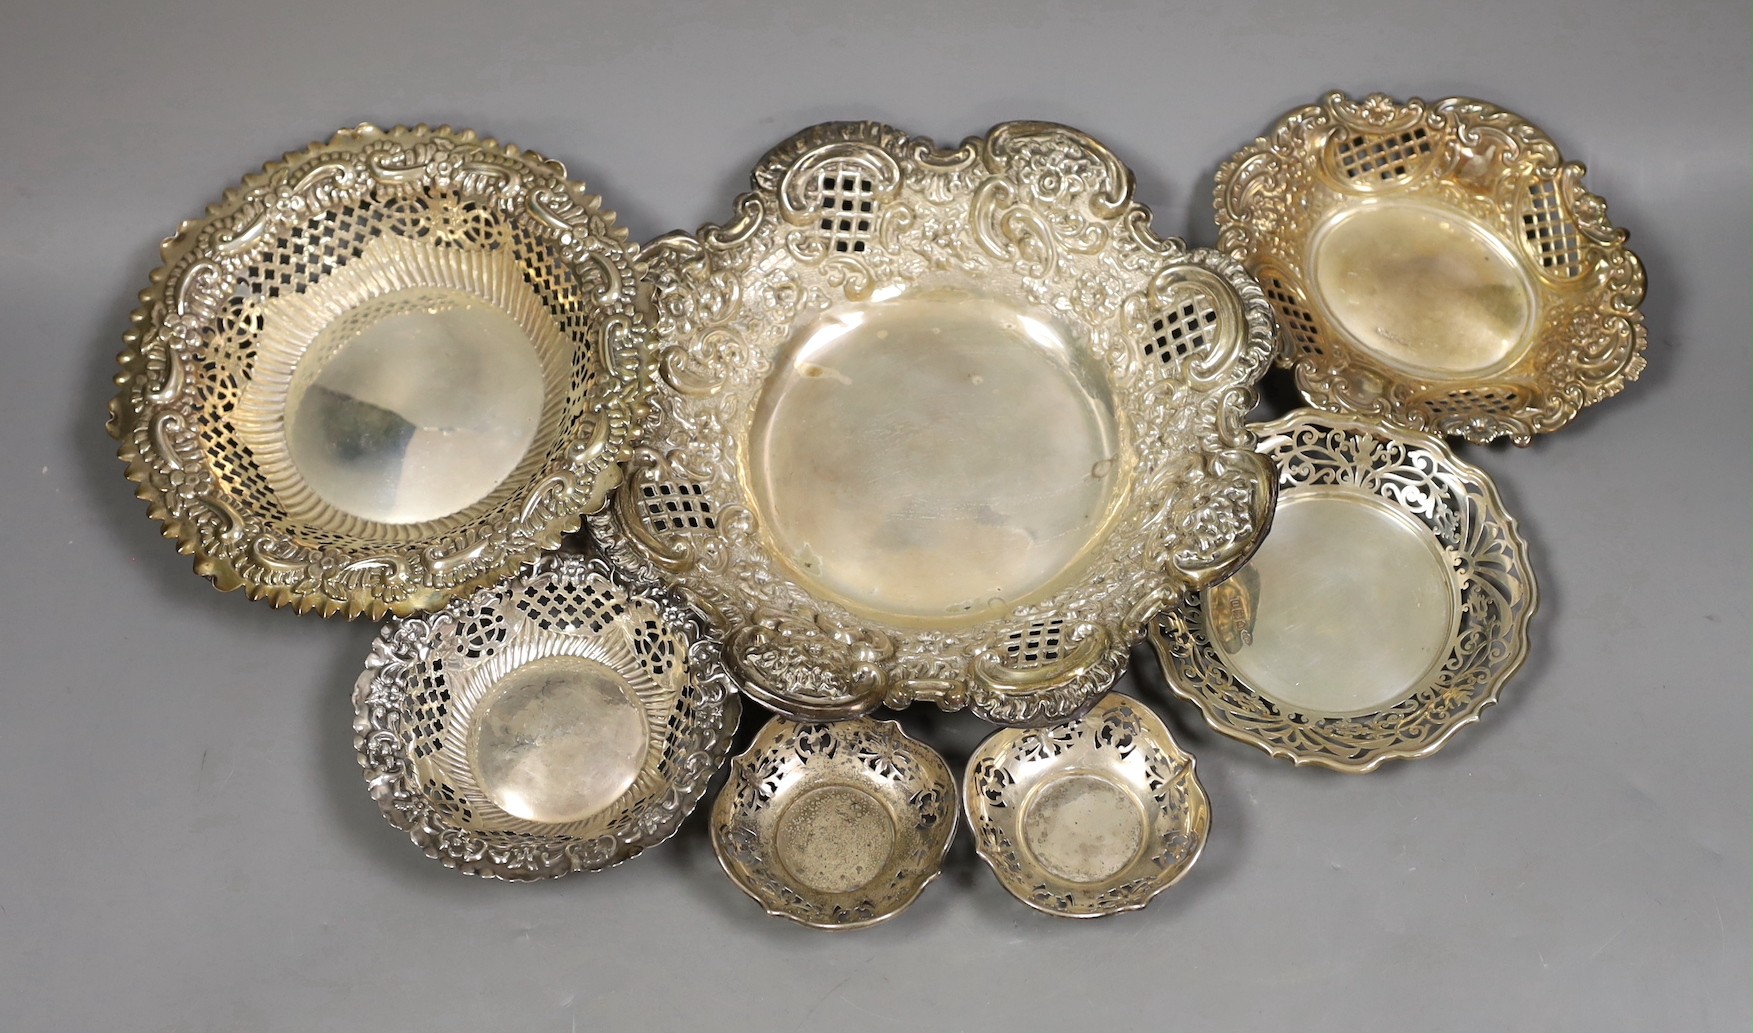 Seven assorted Victorian and later pierced silver nut or bonbon dishes, largest 22.6cm in diameter, 19.4oz.